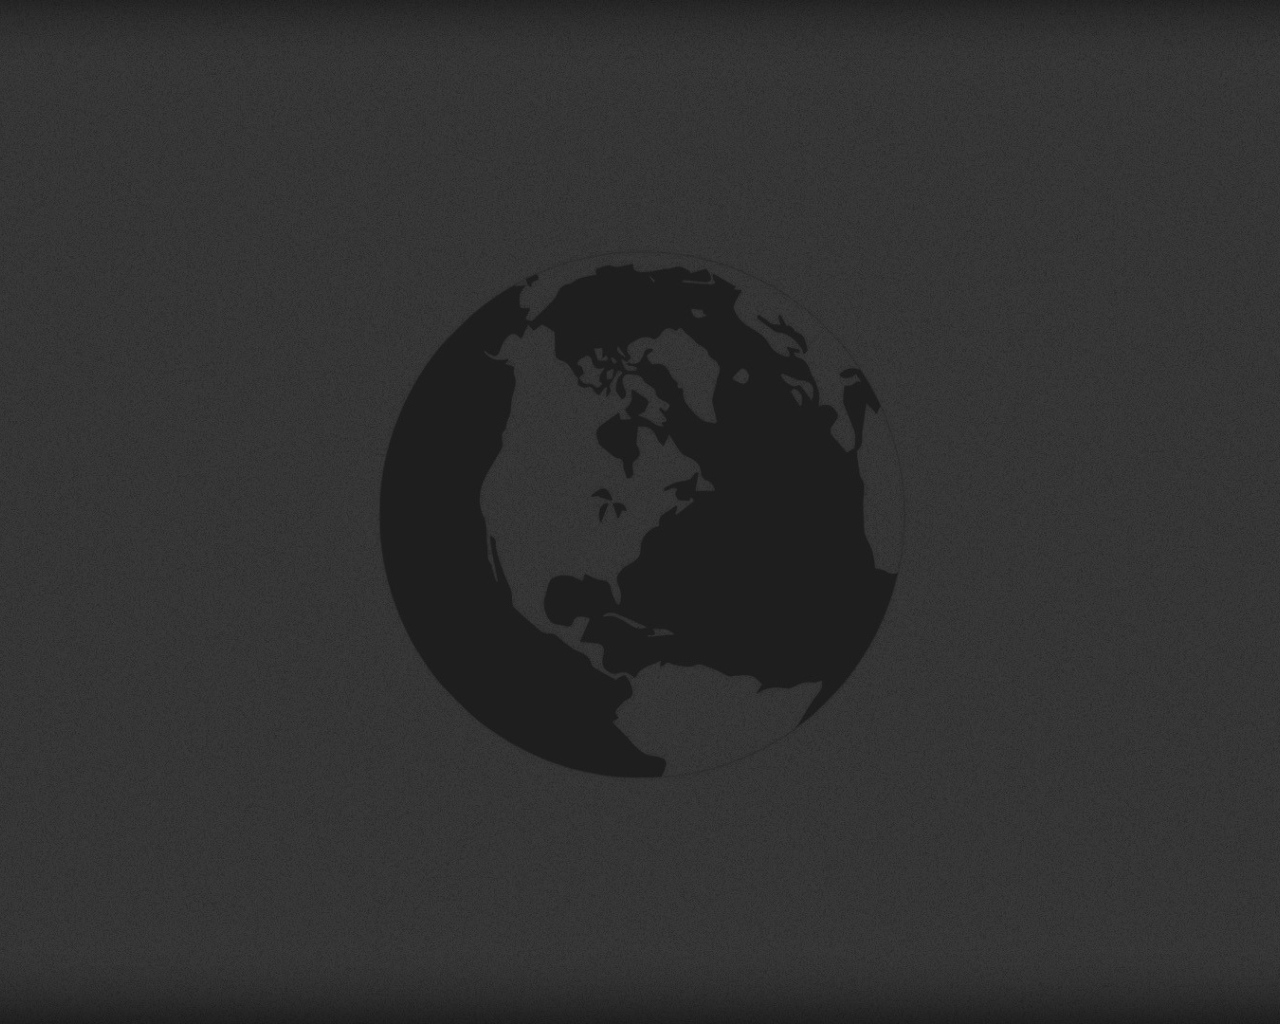 Gray silhouette of the Earth